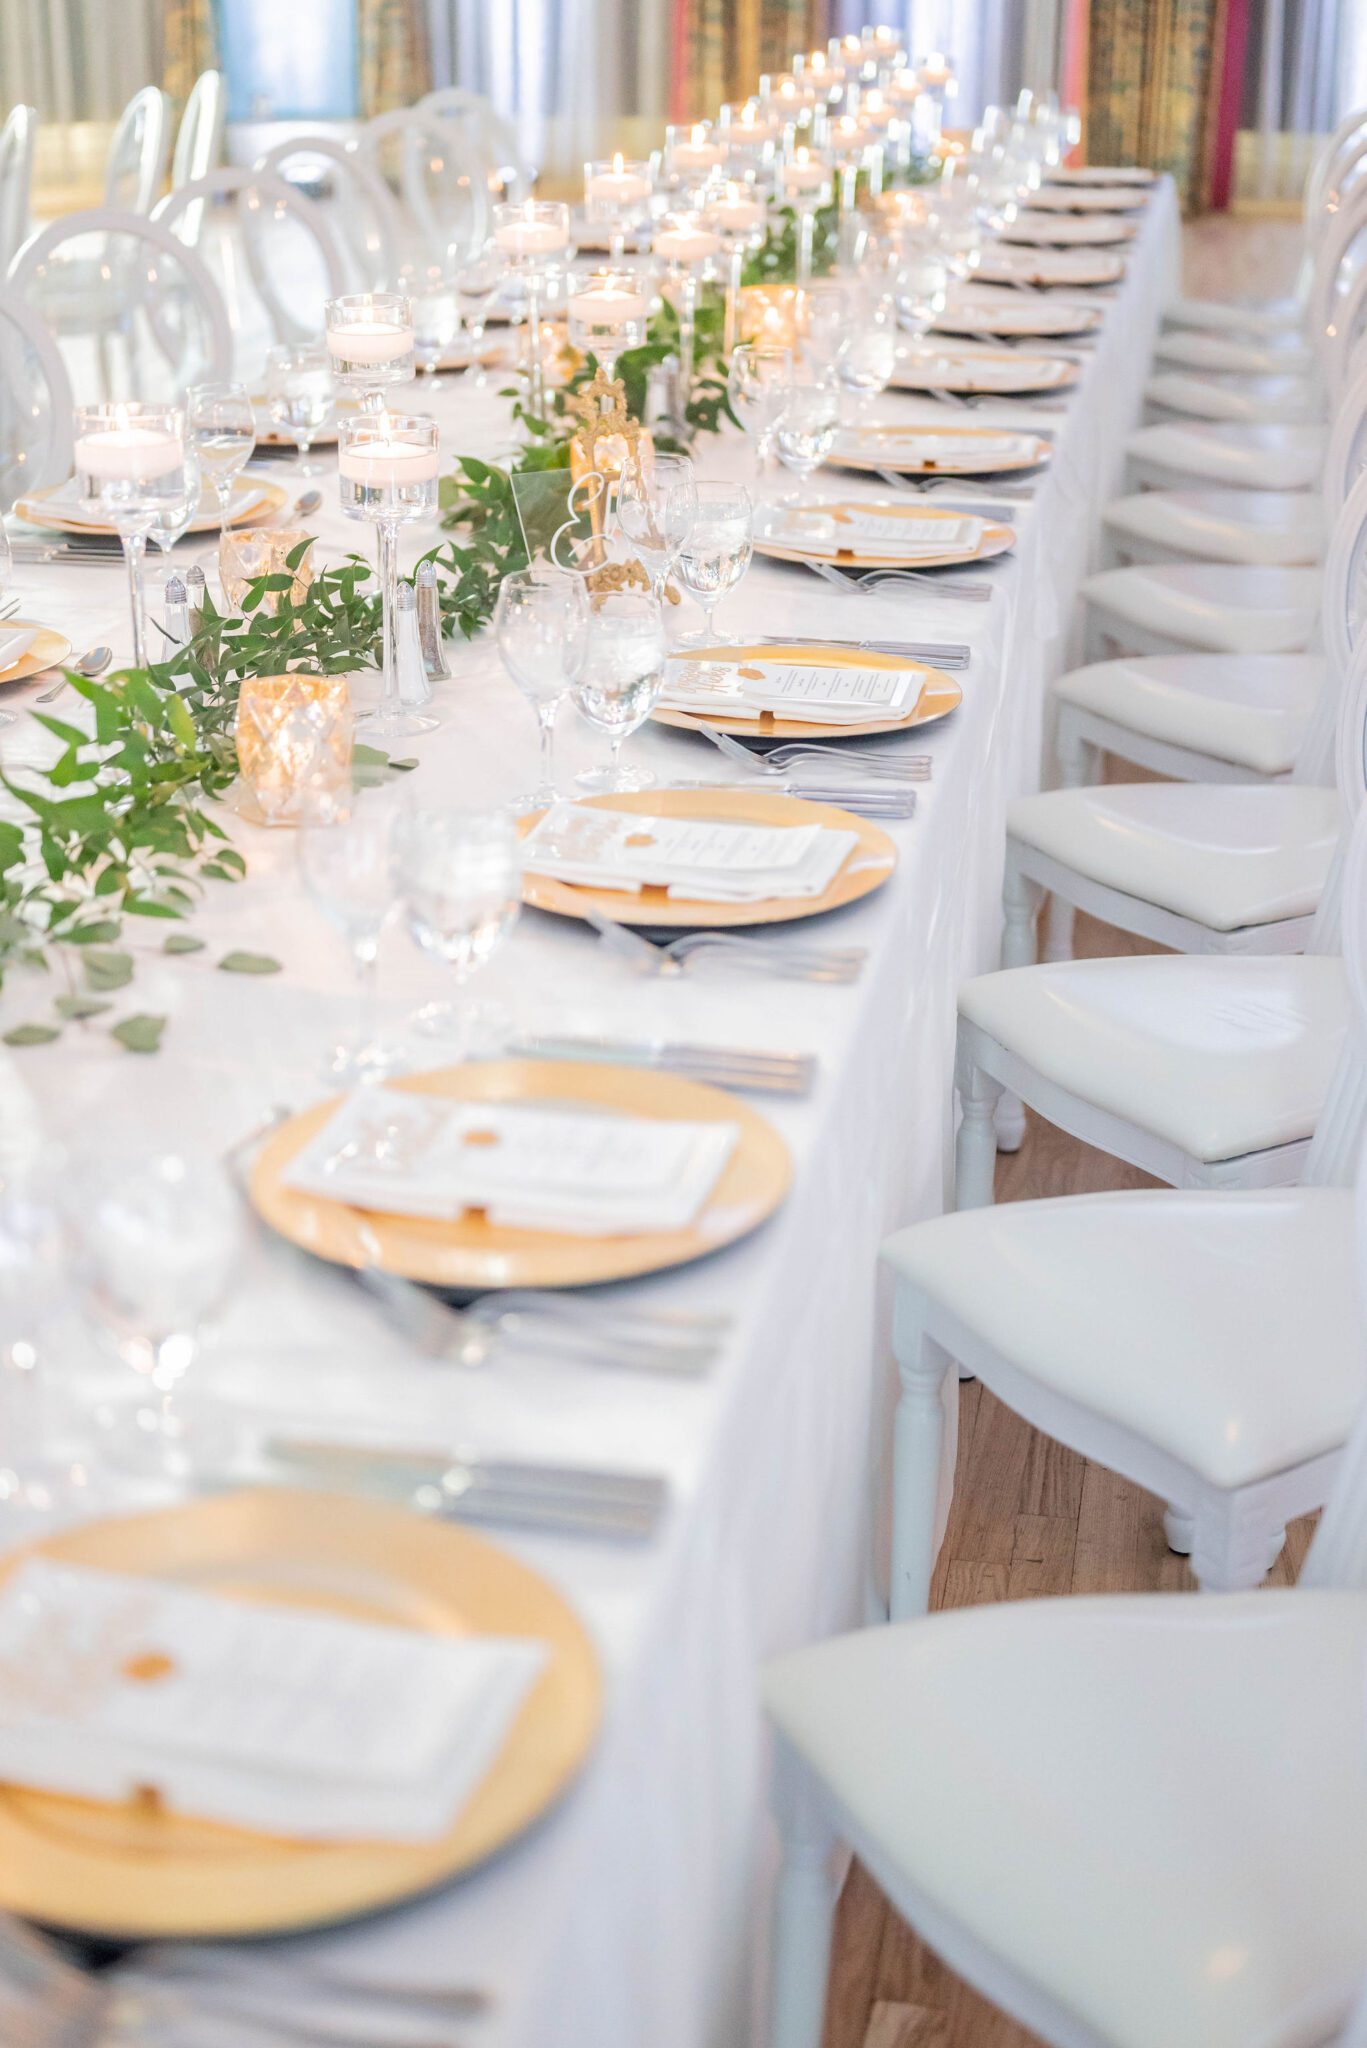 Banff wedding venue inspiration with elegant tablescape, white linens, greenery across the tablescape, gold detailing, and custom menus. 